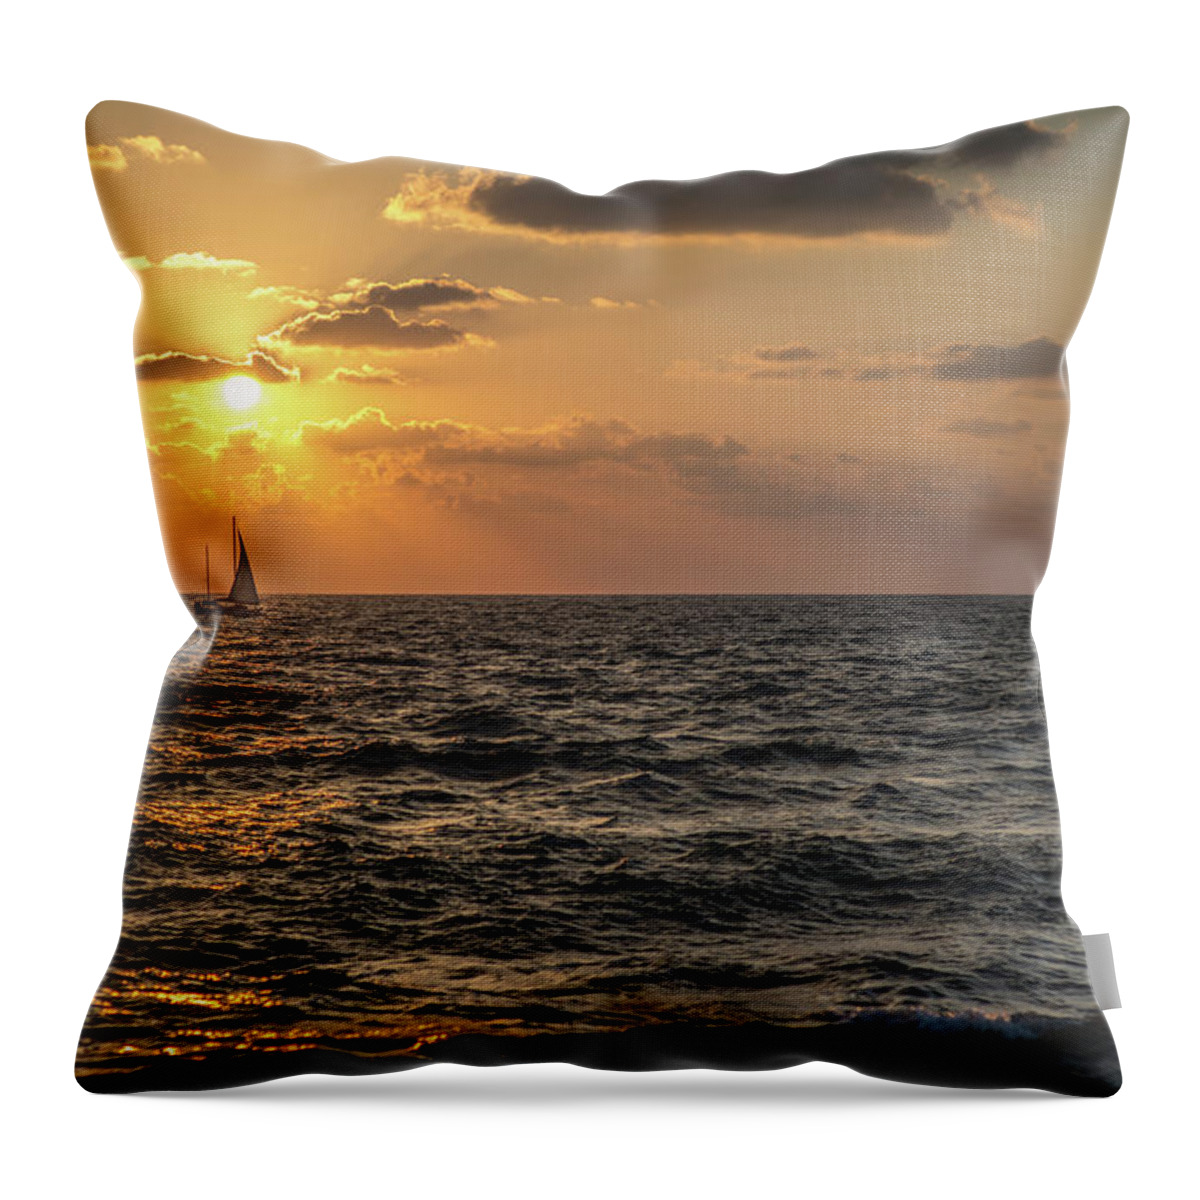 Scenics Throw Pillow featuring the photograph Kitsch by Ran Zisovitch